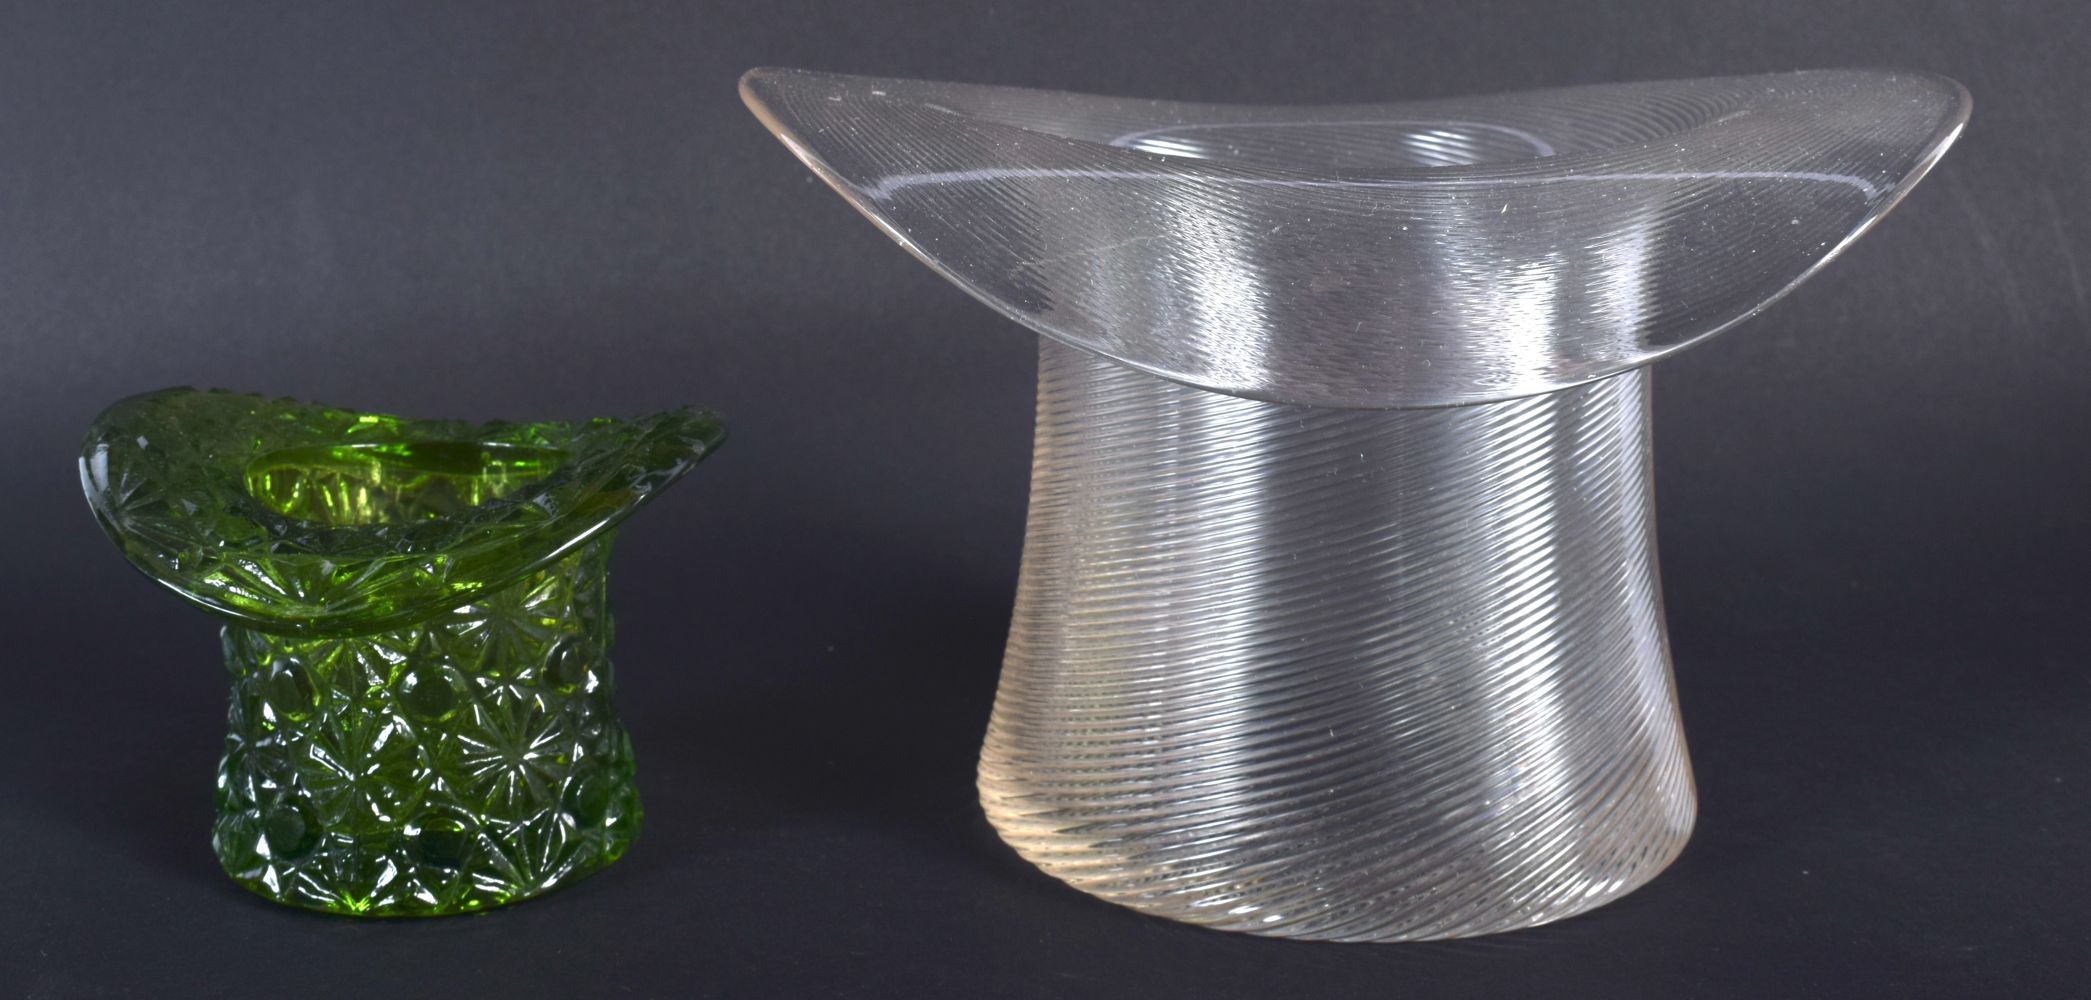 TWO ANTIQUE GLASS UPTURNED TOP HATS. 12 cm x 12 cm. - Image 2 of 4